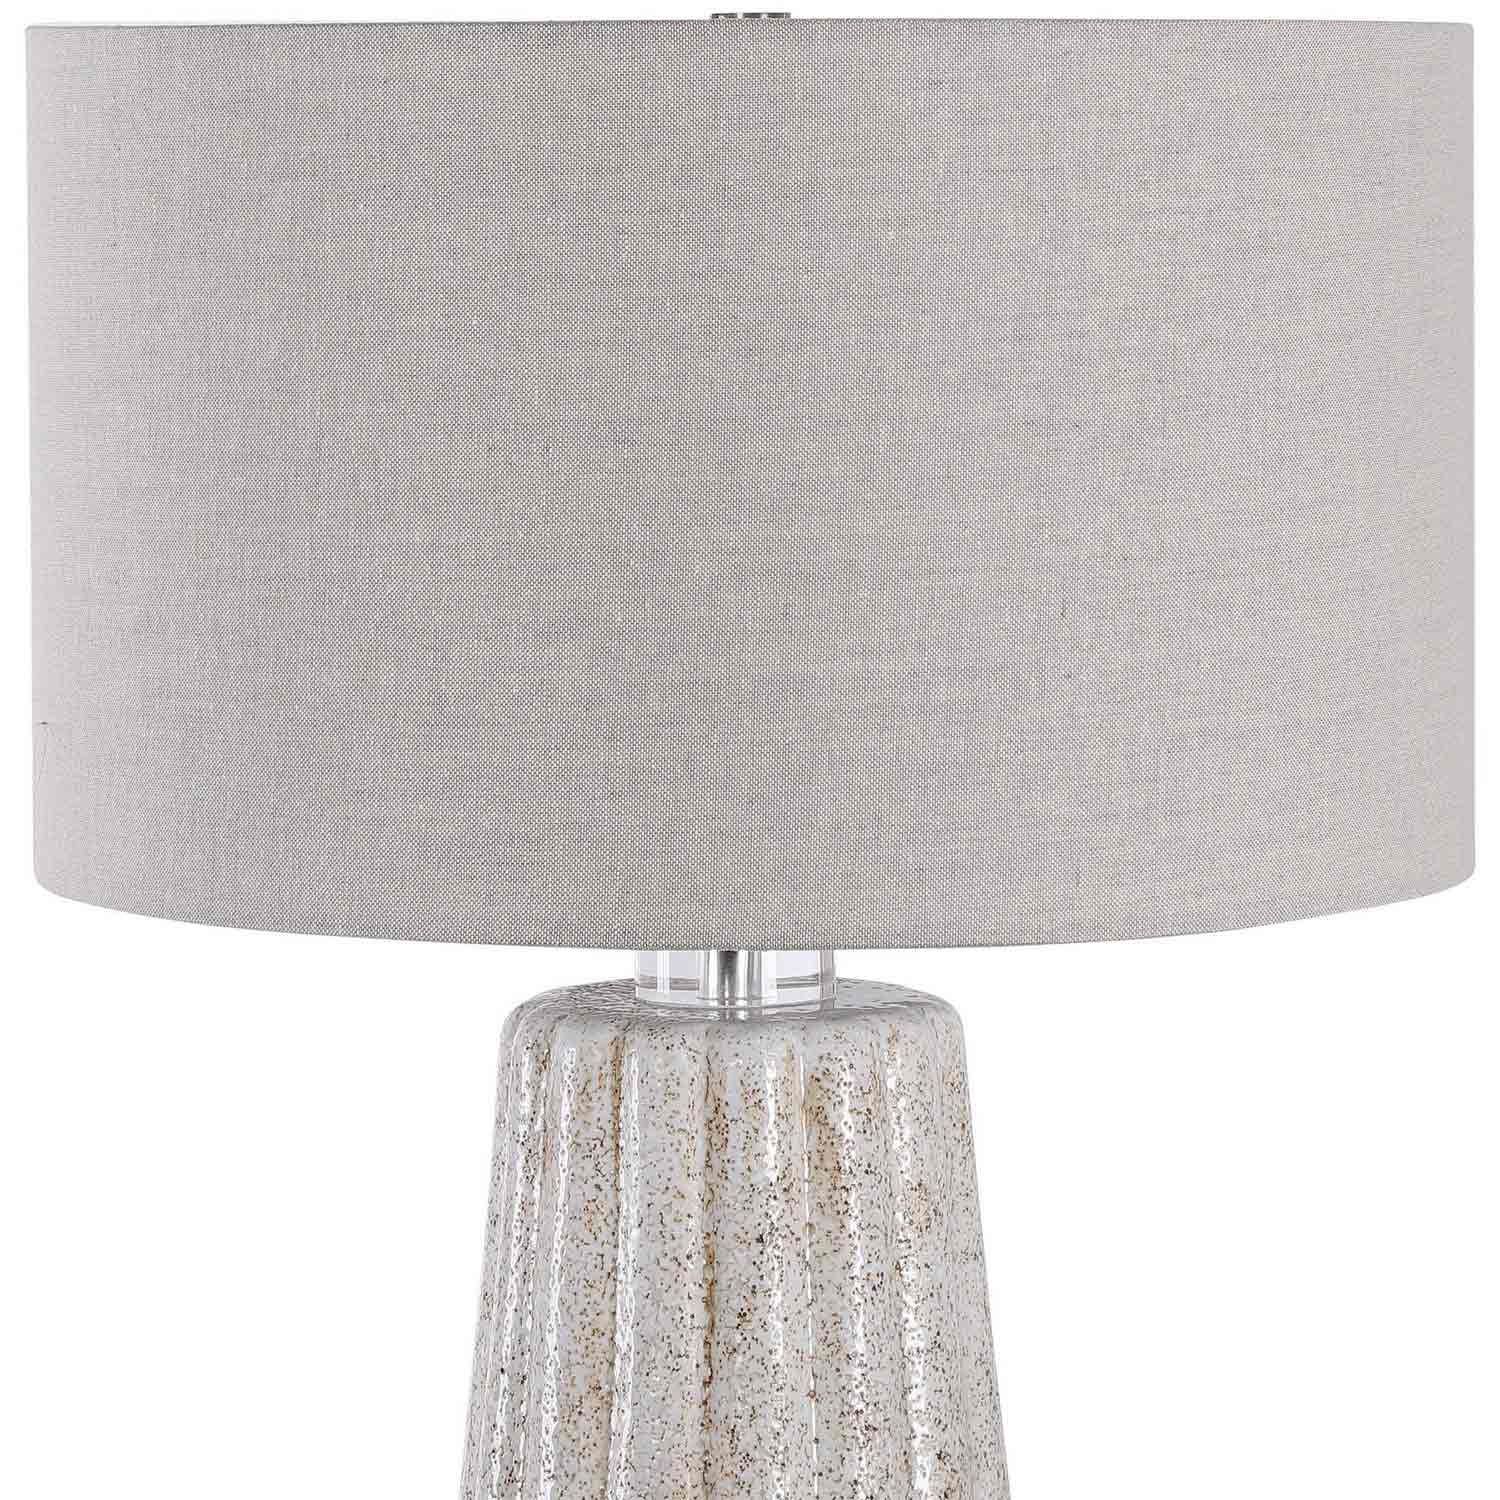 Uttermost Pikes Table Lamp - Stone/Ivory